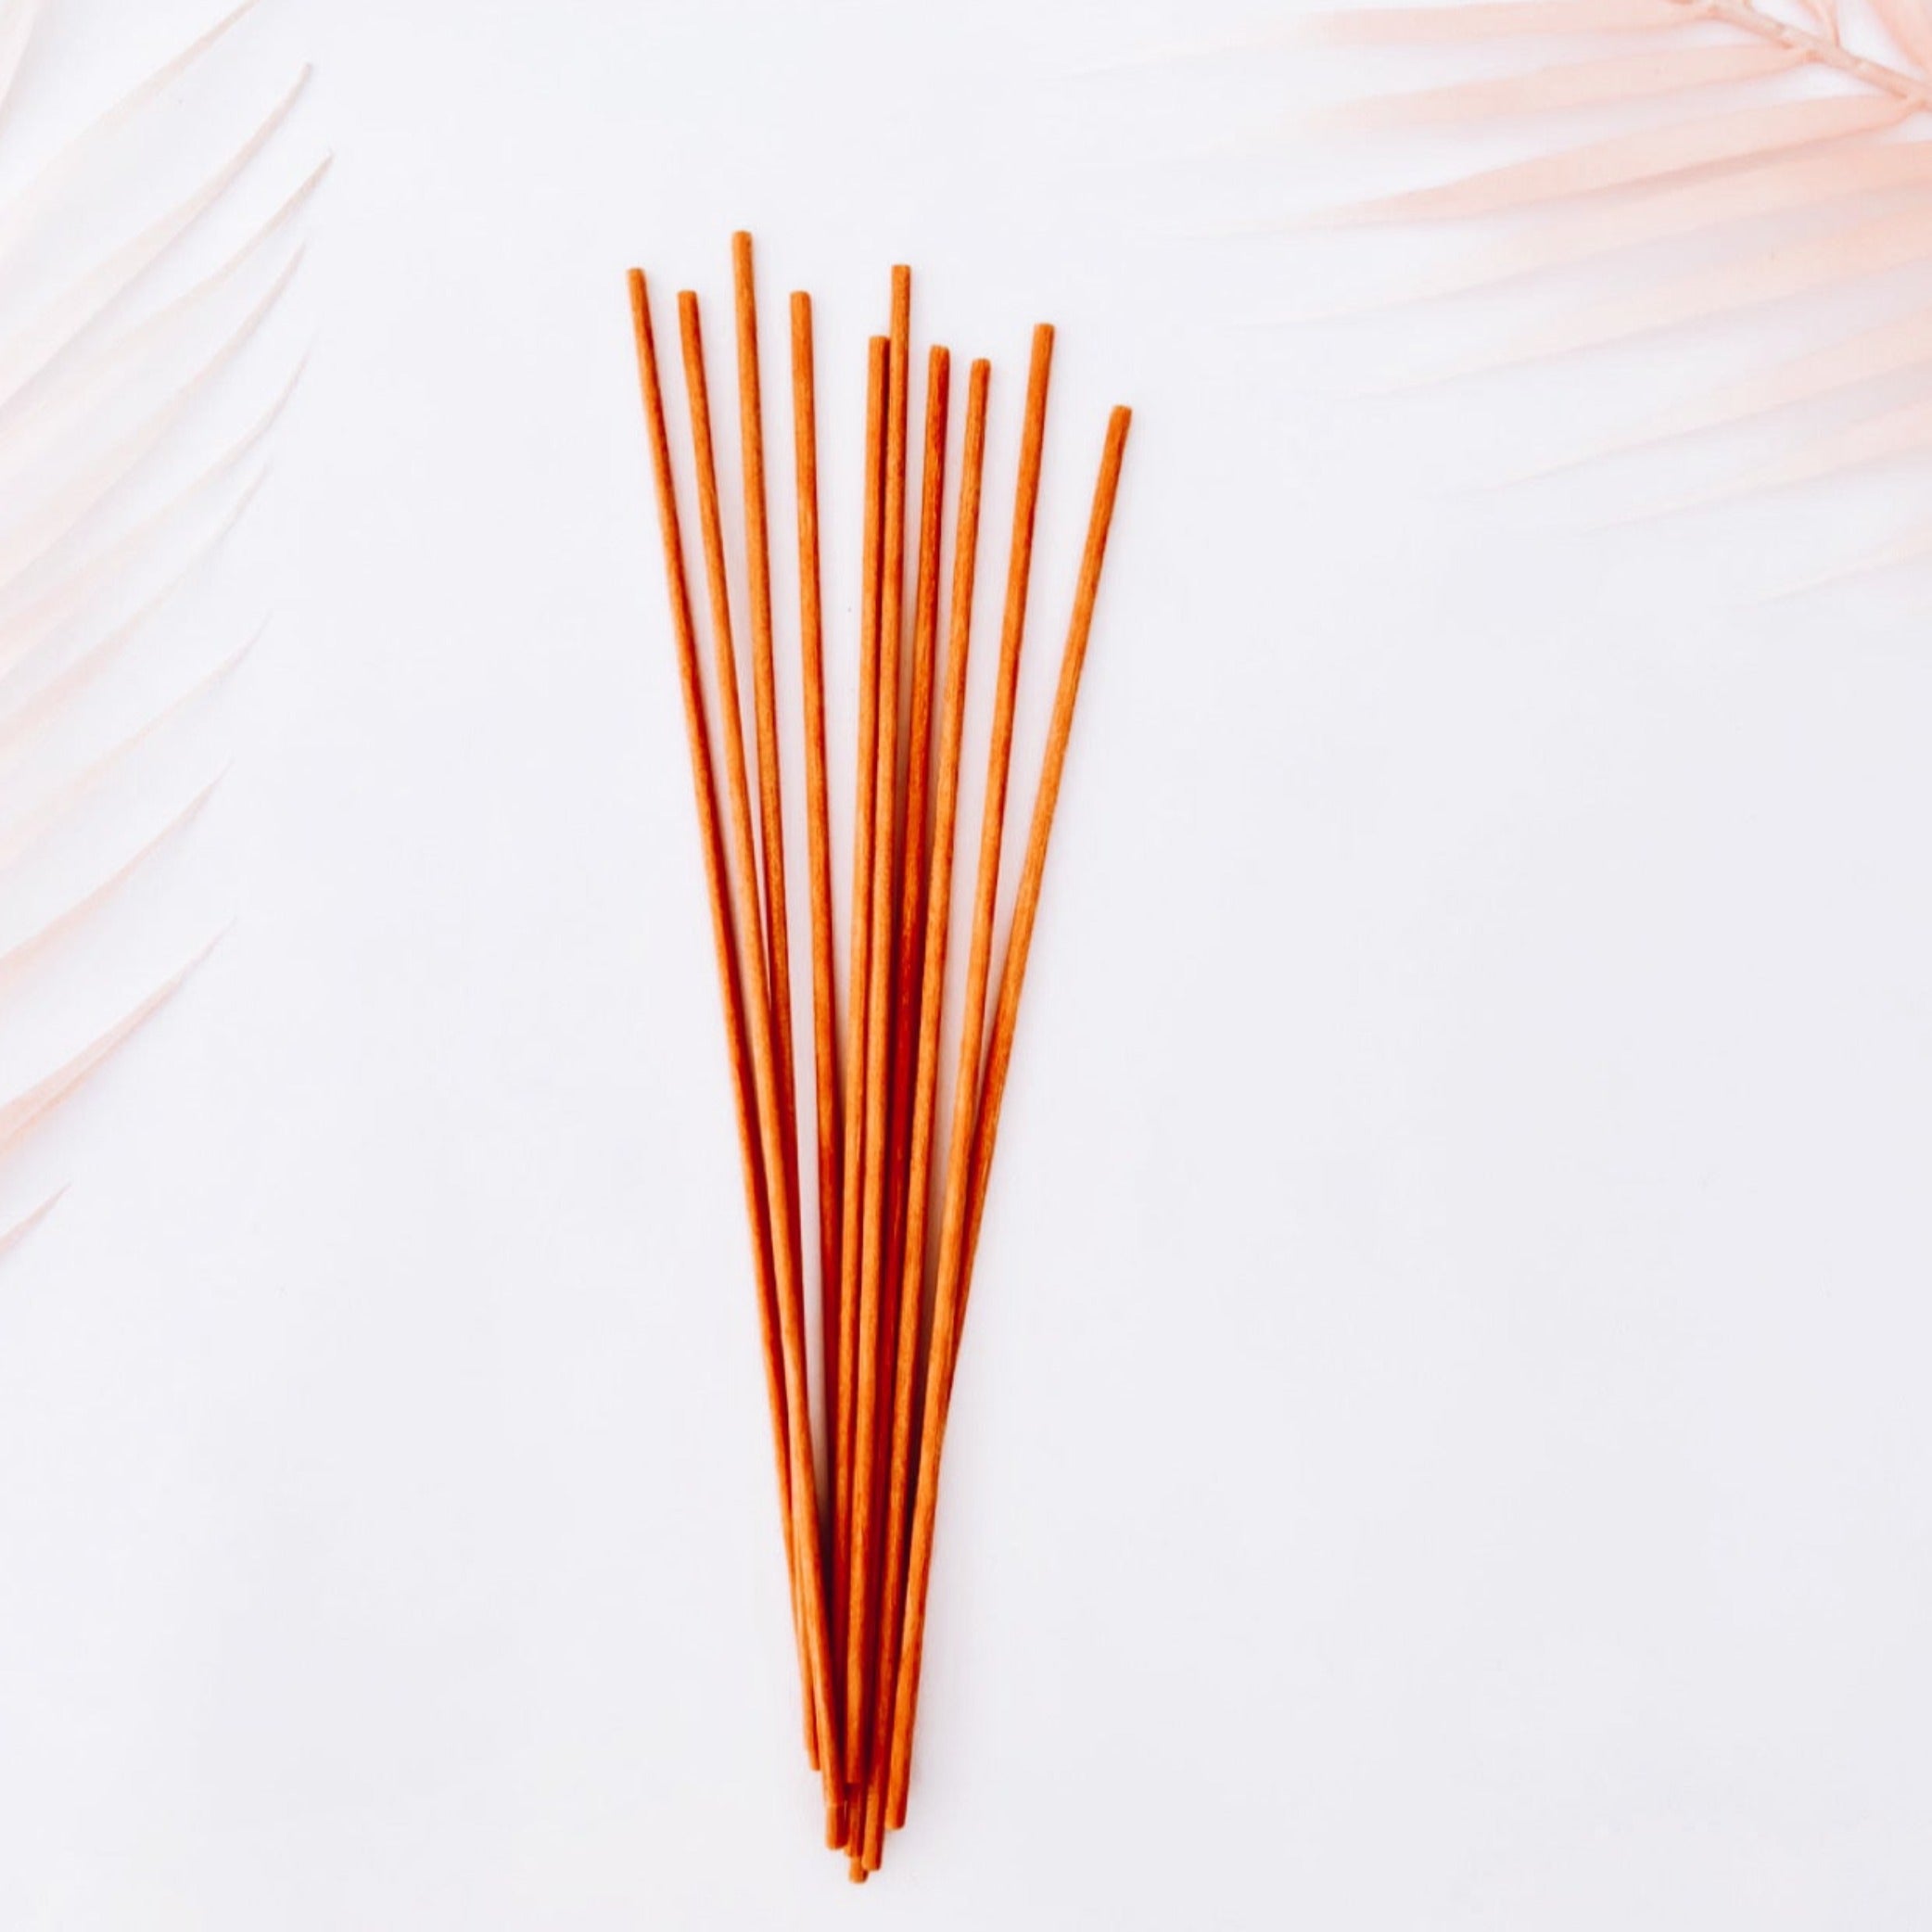 REED STICKS FOR DIFFUSERS - PACK OF 10